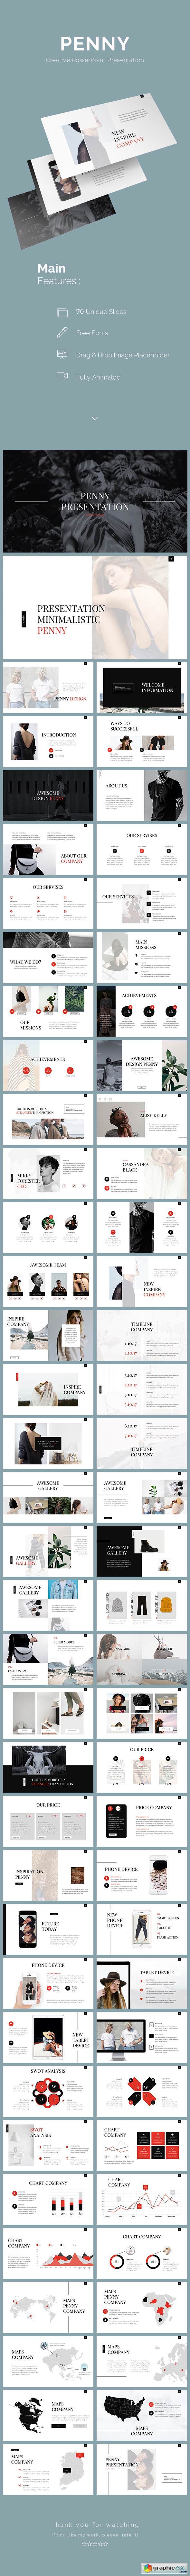 Penny PowerPoint Template